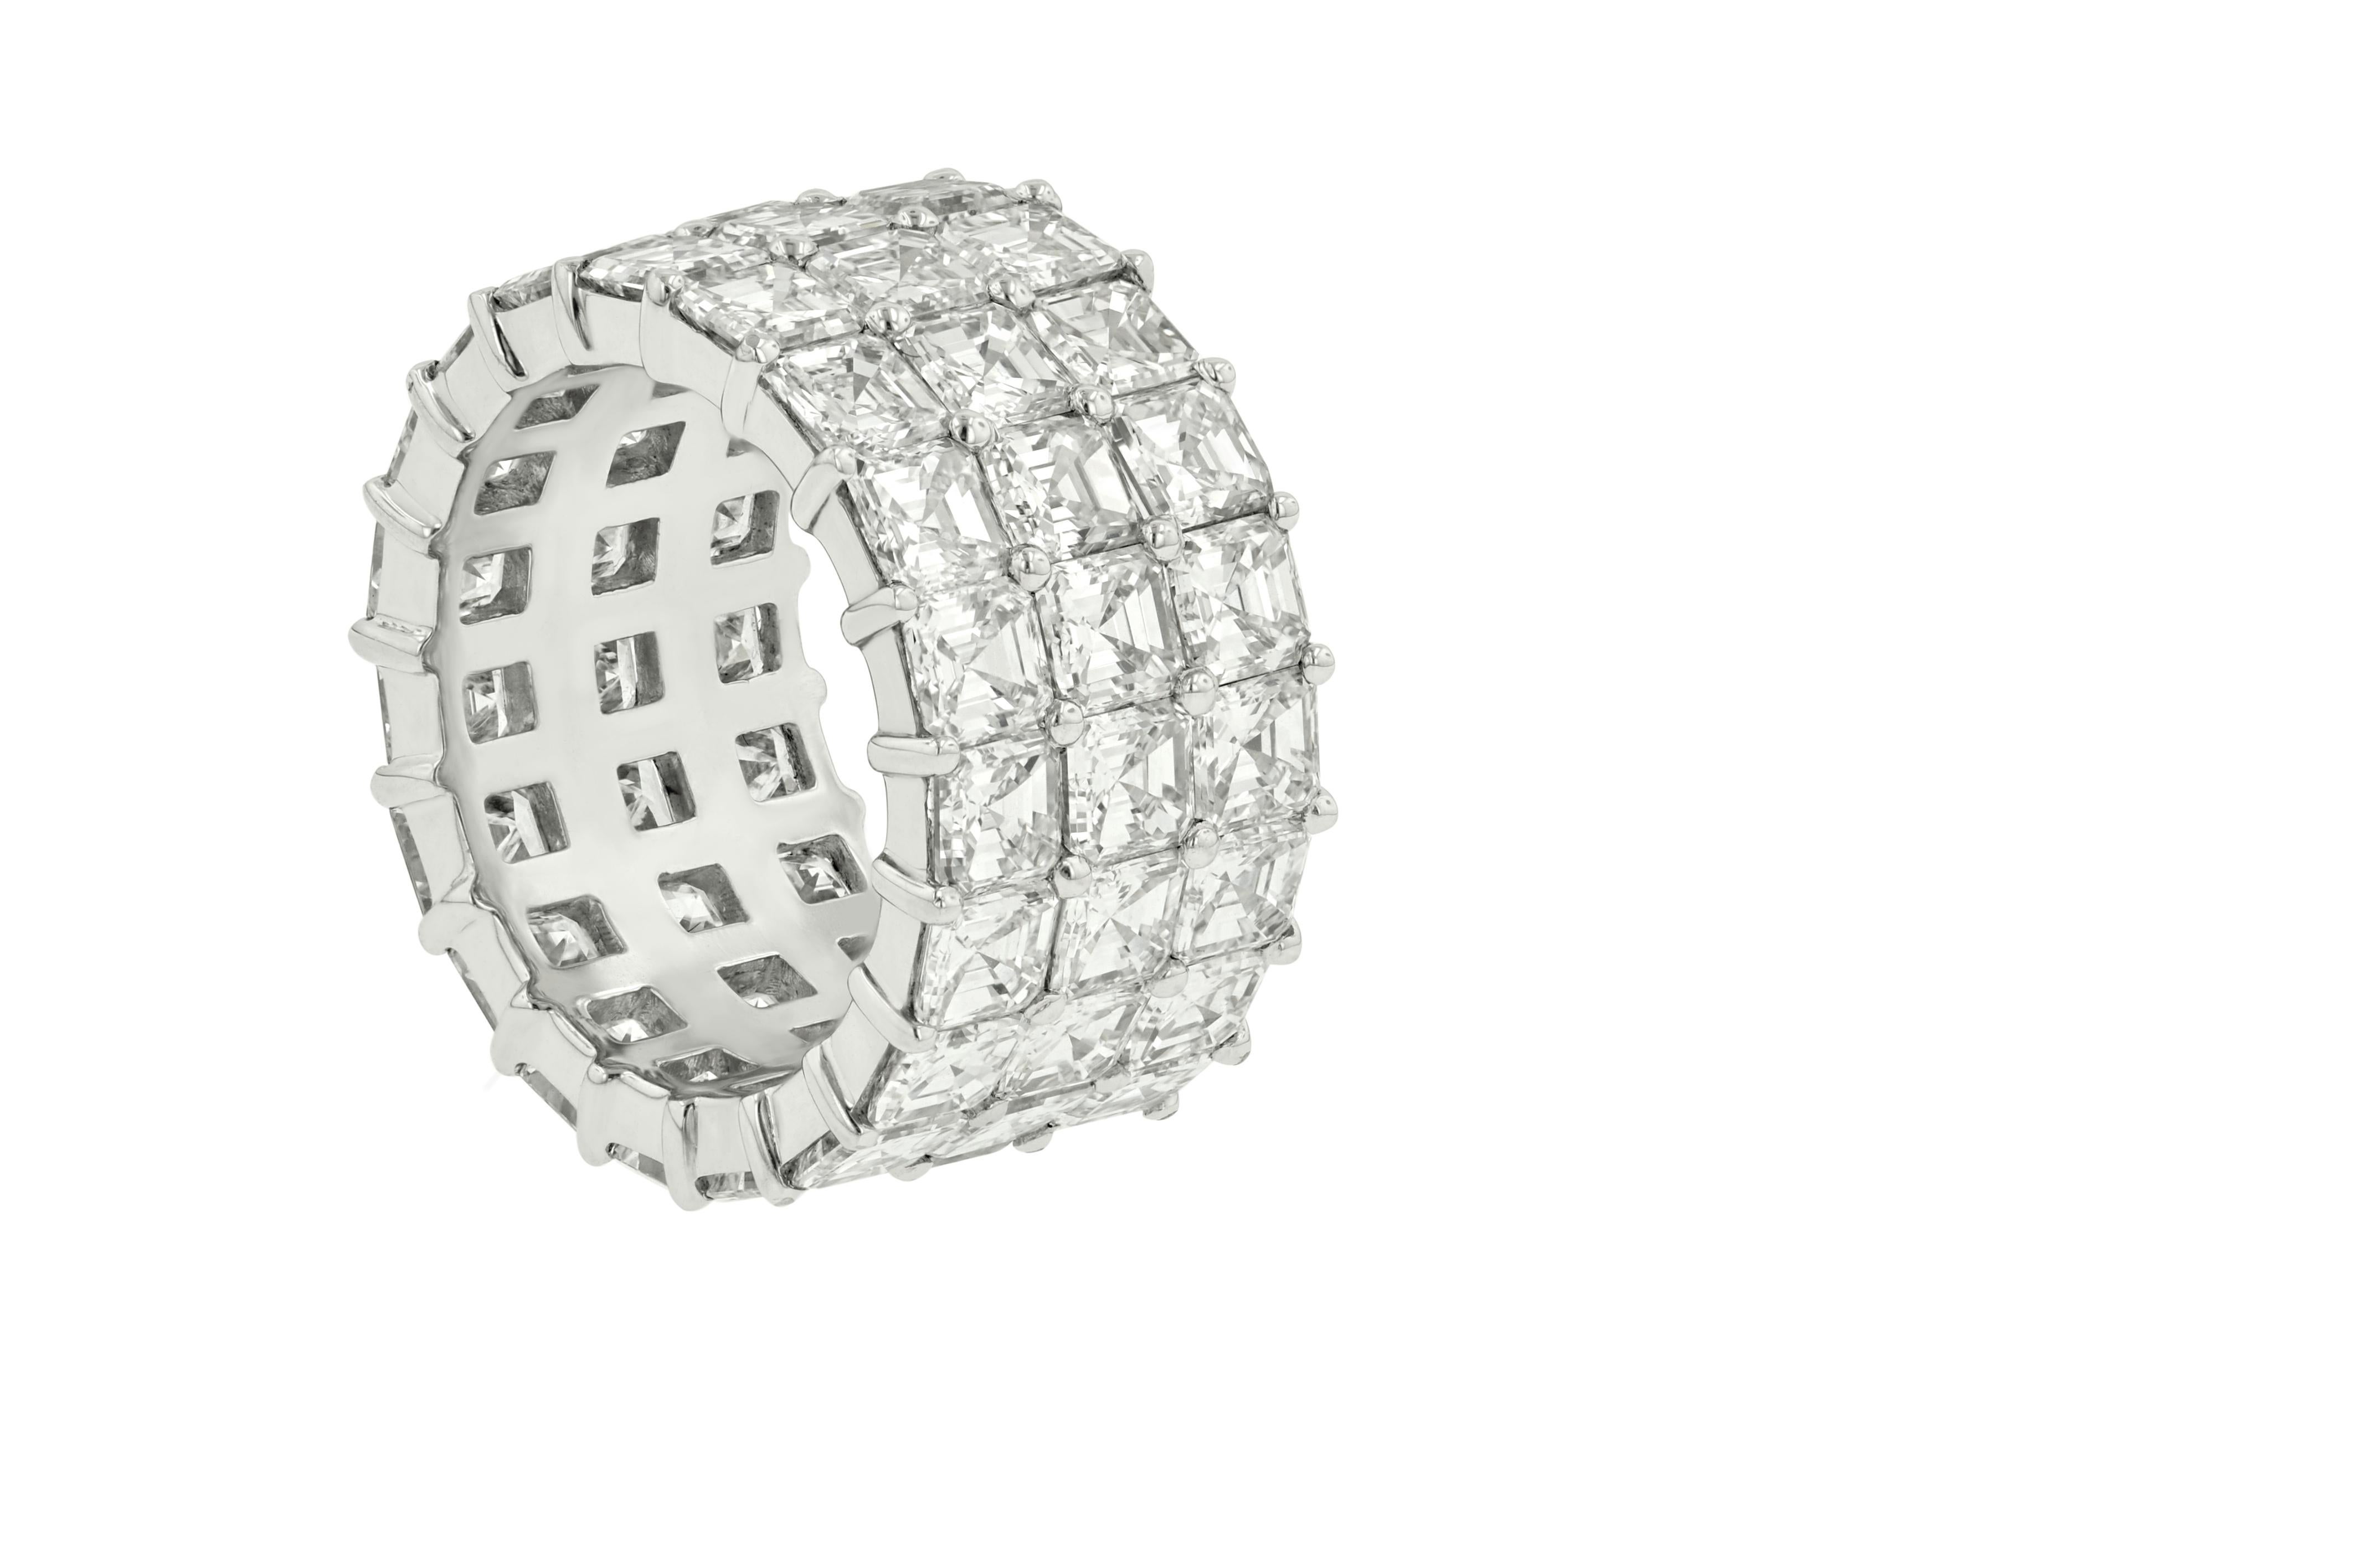 Platinum three rows D,E,F- VVS-VS asscher cut diamond band, feture 14.00ct total weight of assher diamonds.
Diana M. is a leading supplier of top-quality fine jewelry for over 35 years.
Diana M is one-stop shop for all your jewelry shopping,